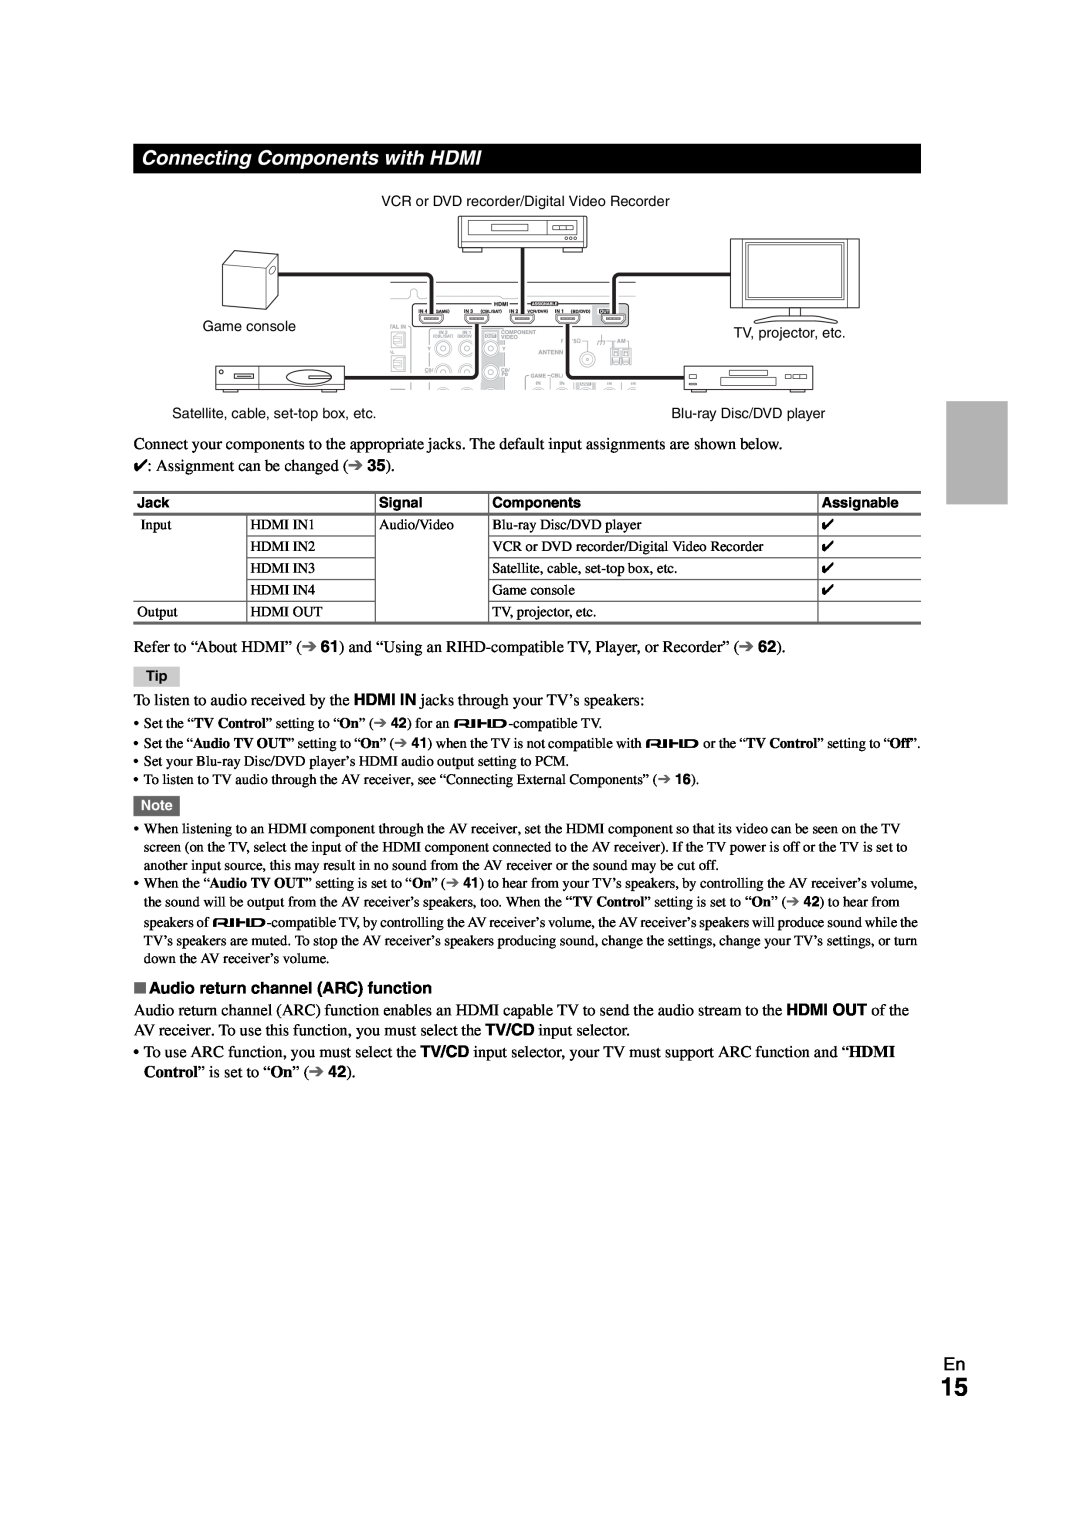 Onkyo TX-SR508 instruction manual Connecting Components with HDMI, Audio return channel ARC function 